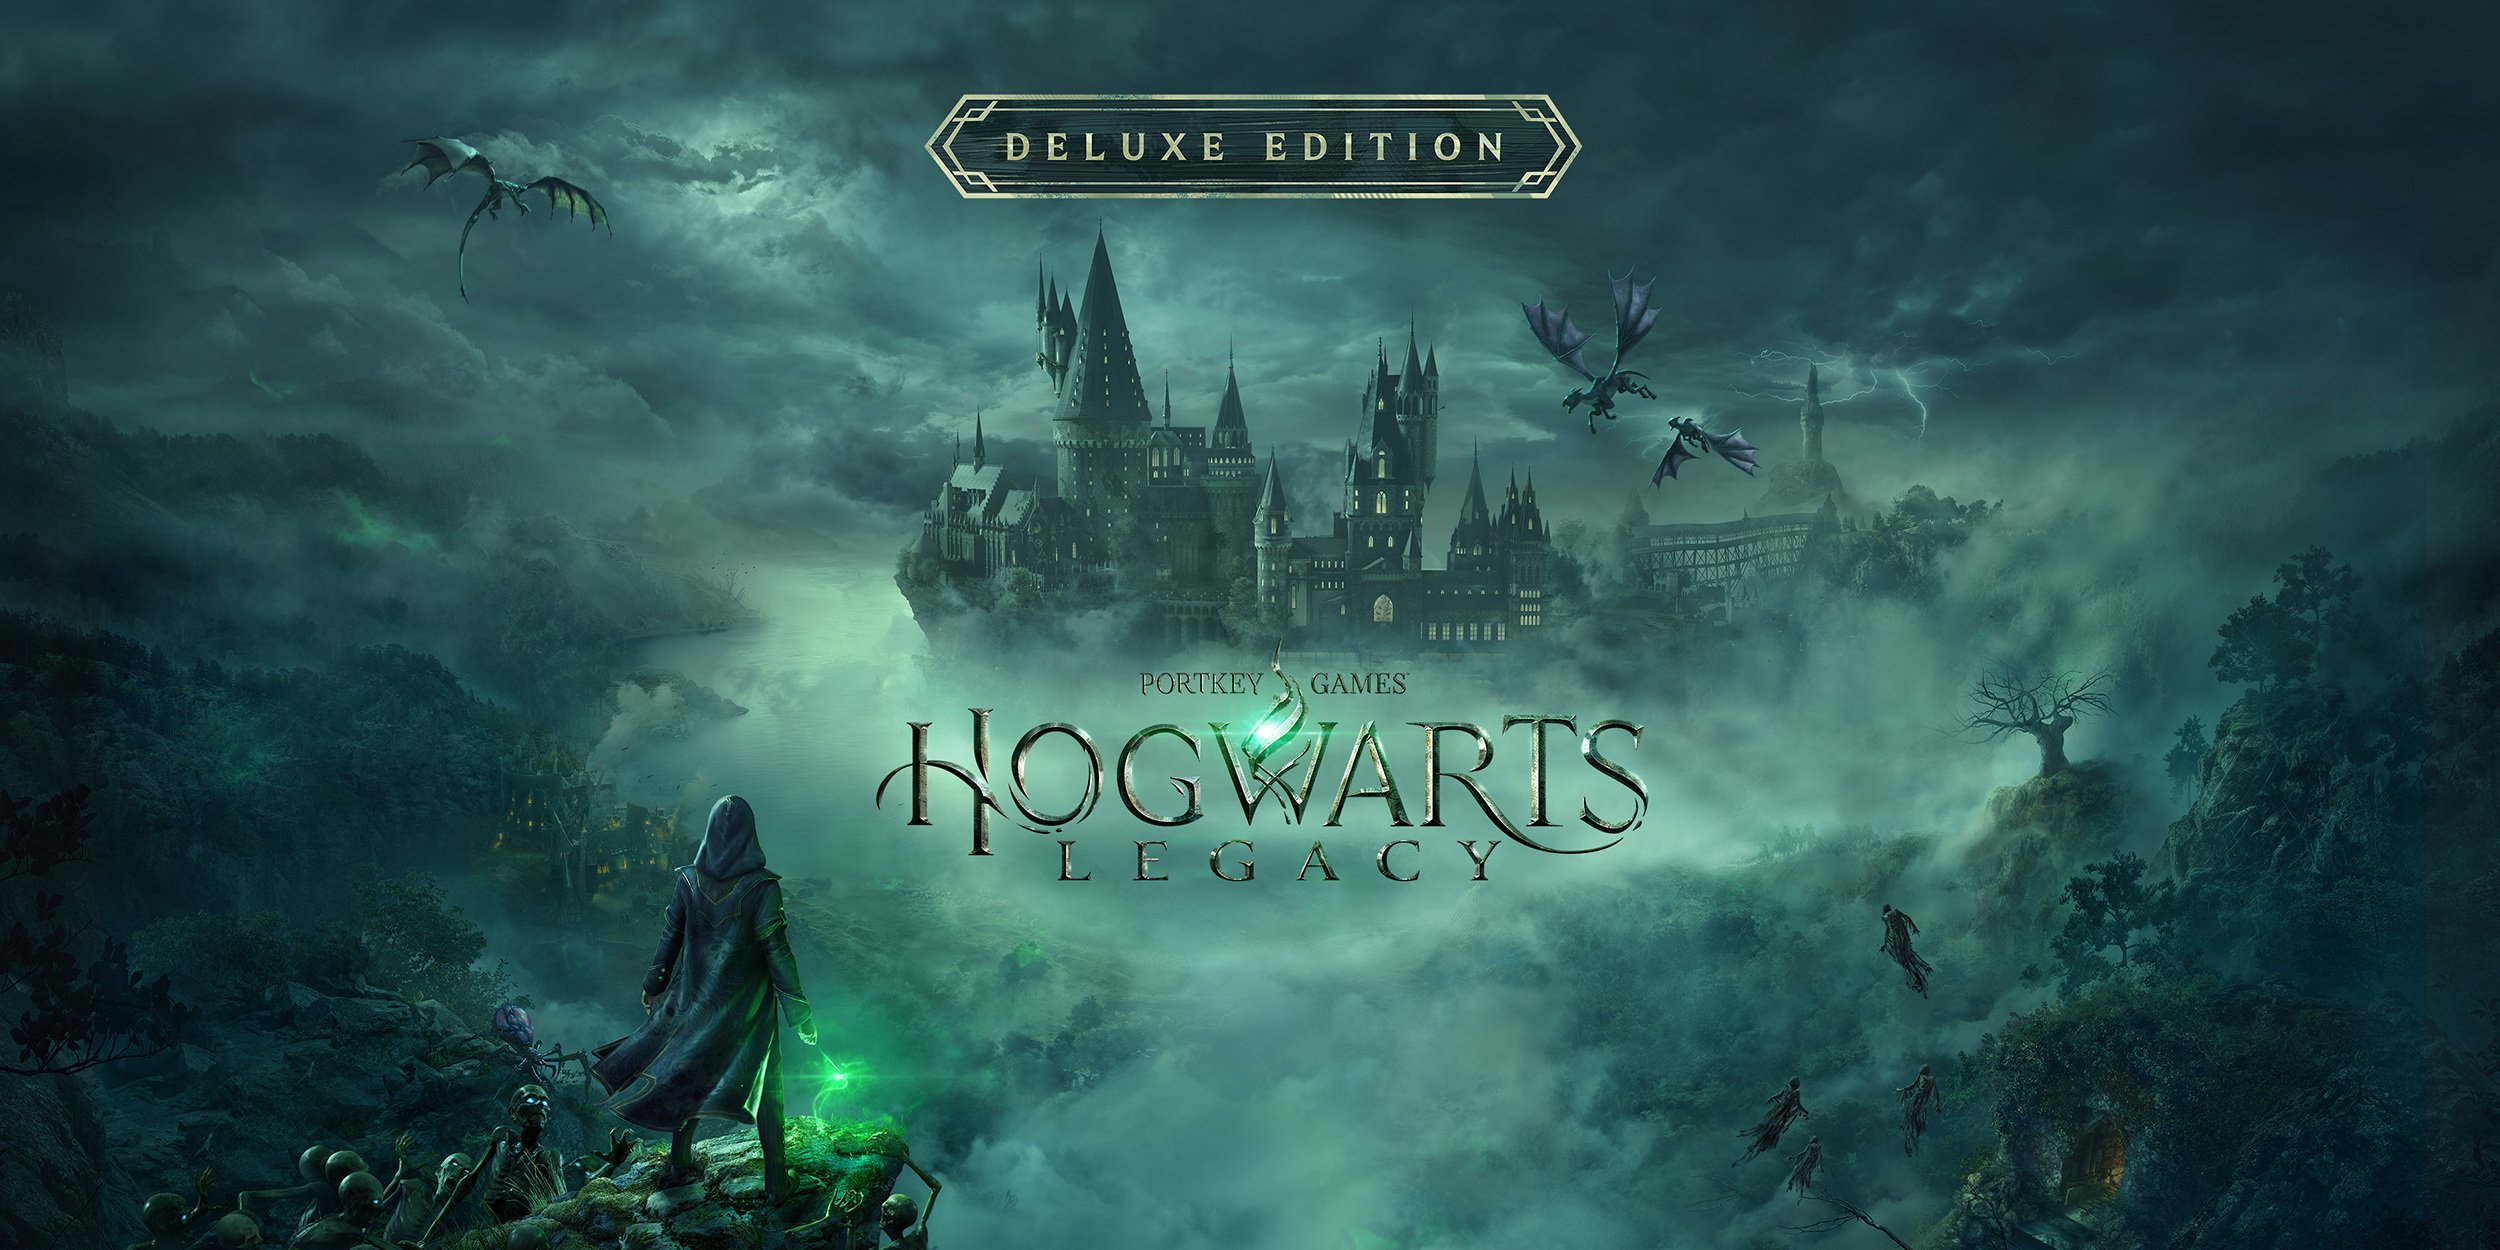 Play Hogwarts Legacy Early: Article Pic - Deluxe Edition